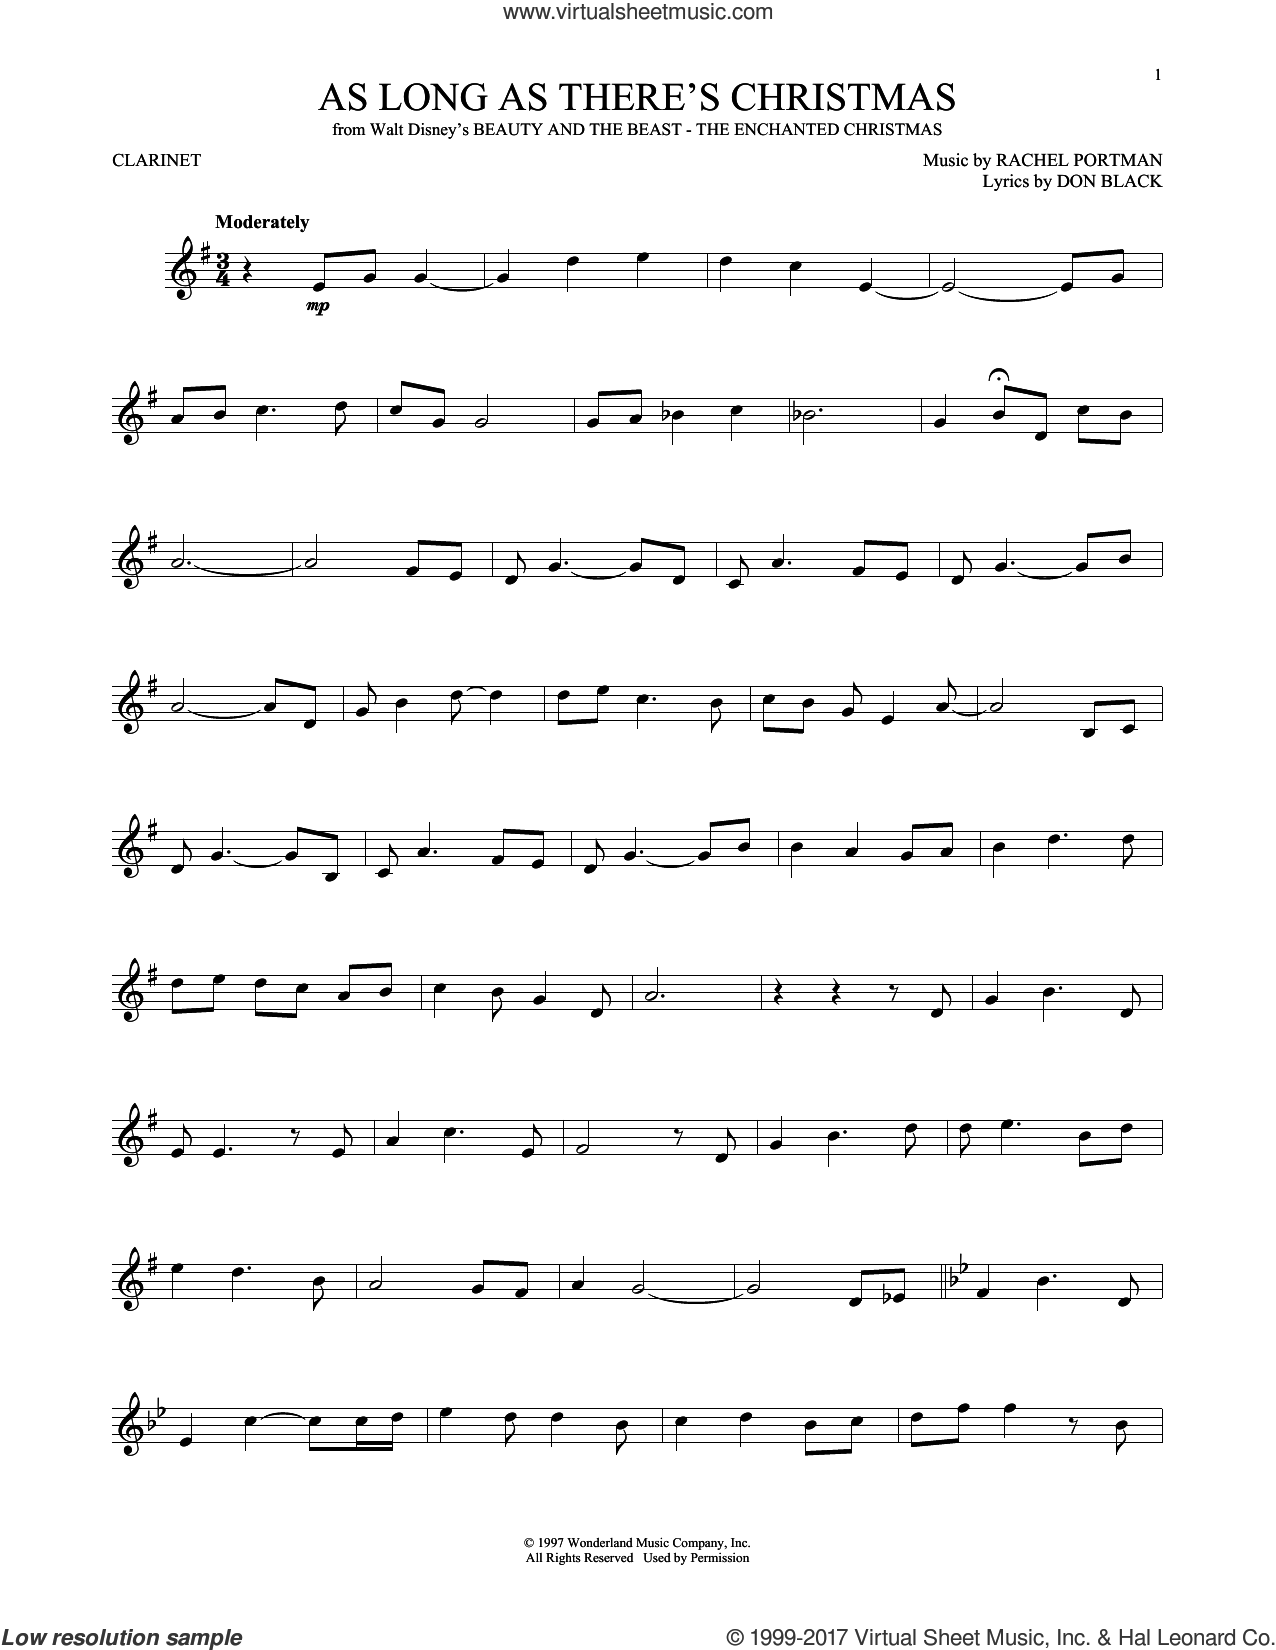 Do You Want To Build A Snowman? (from Frozen) sheet music for